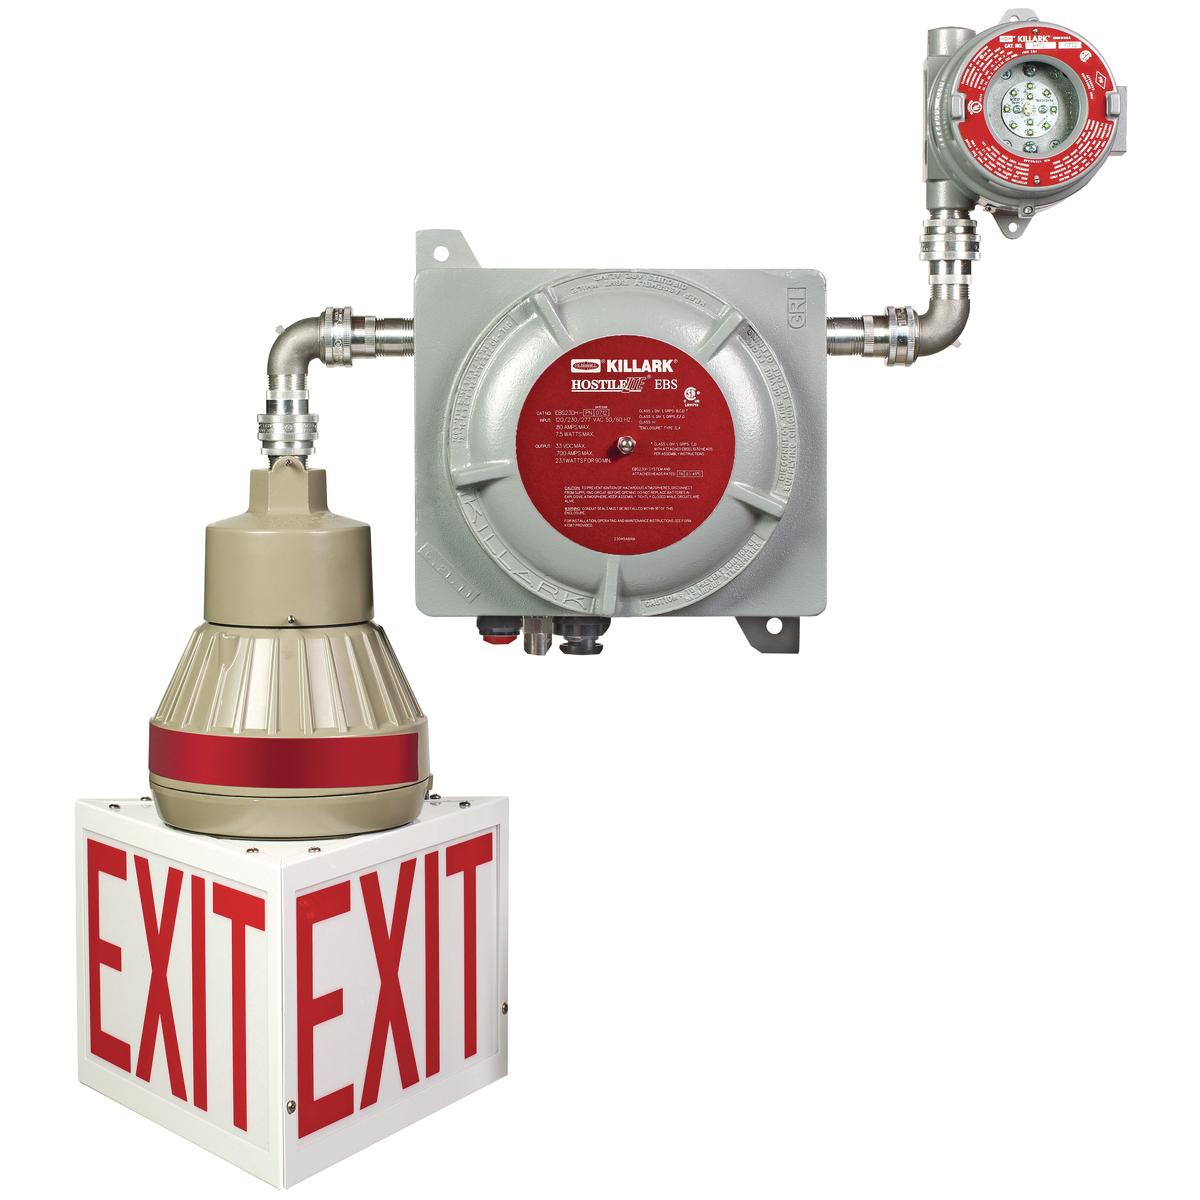 Hubbell EBS23DH-PTCE The EBS Series Explosion Proof LED Emergency Battery Backup System is designed for egress or anti-panic applications. This fixture is made with a cast copper-free aluminum housing and fixture heads that are powder epoxy powder coat painted for extra corro